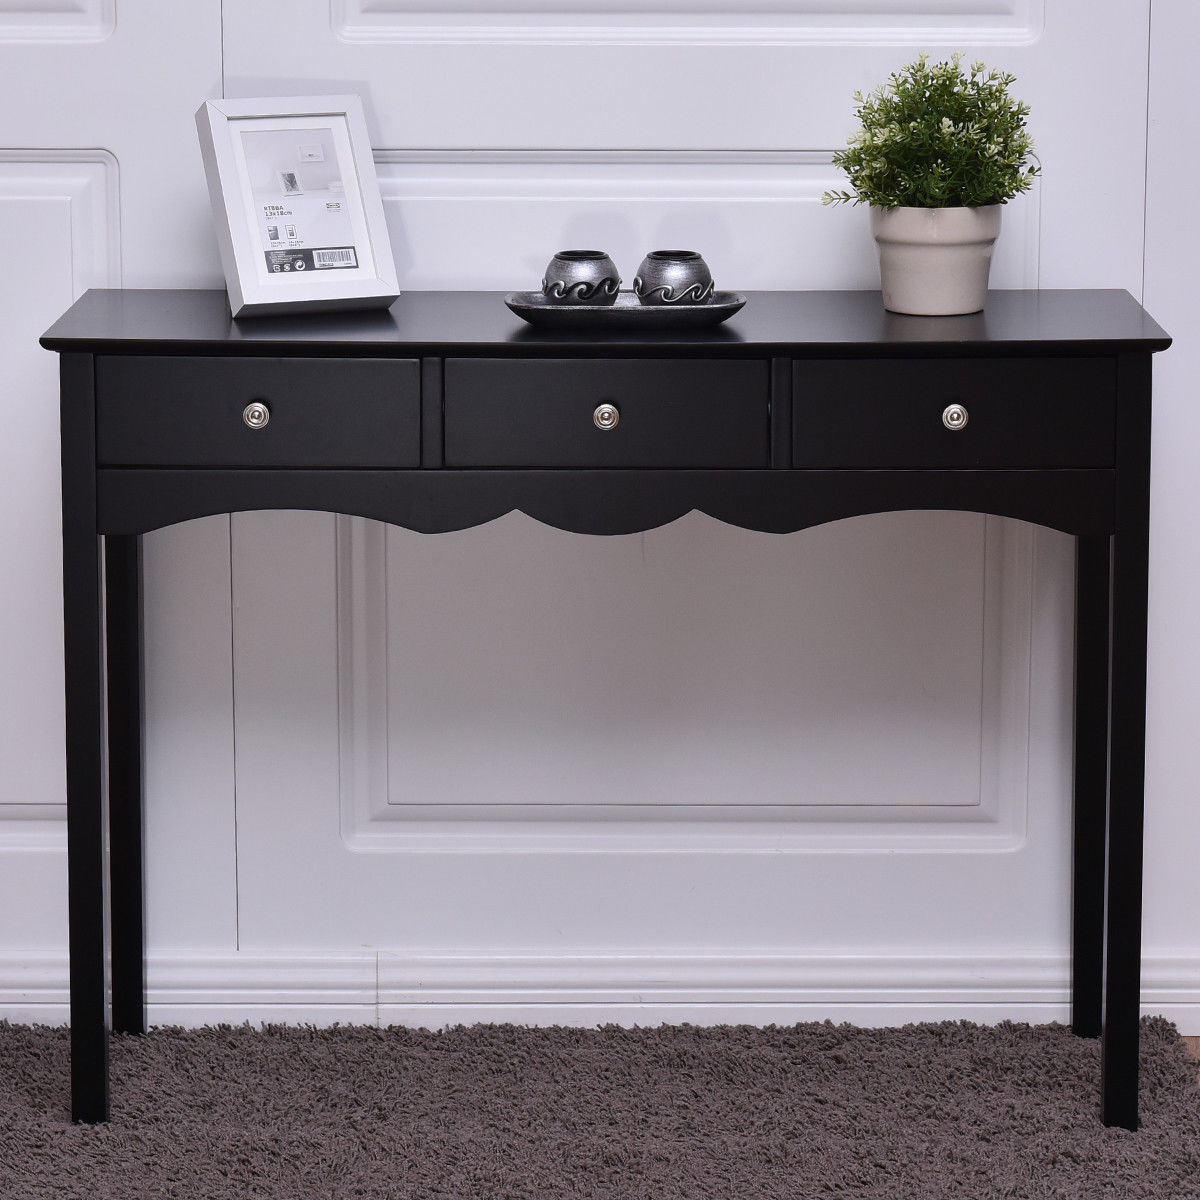 way console table hall side desk accent hallway drawers entryway black west elm couch living room decor unique wine racks pier one imports dining countertop and chairs cream